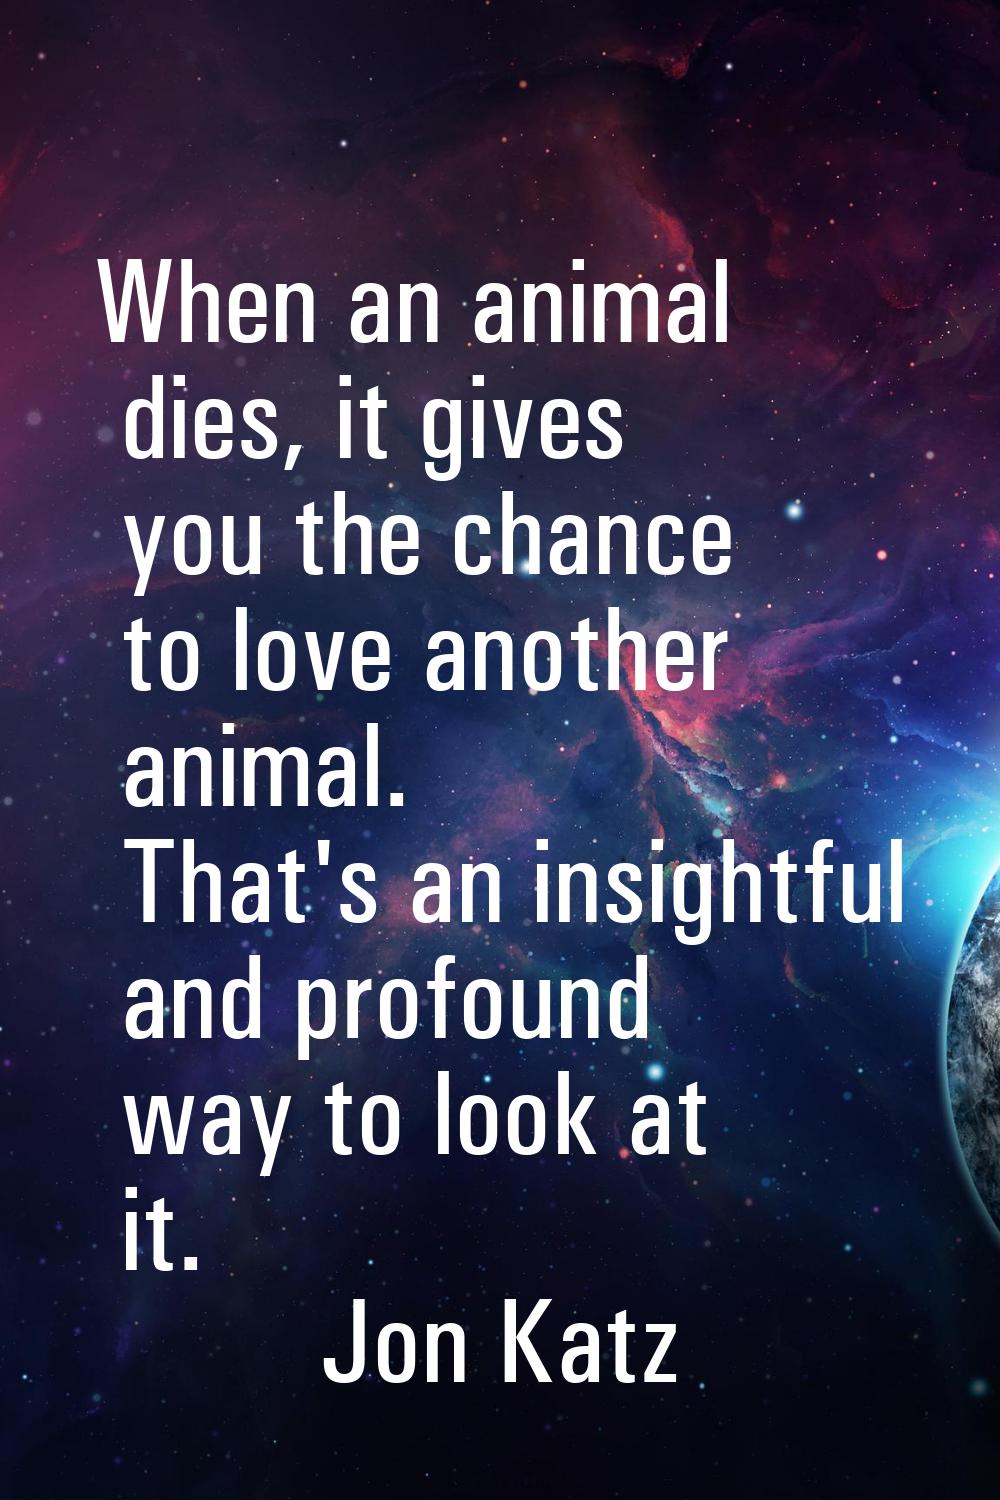 When an animal dies, it gives you the chance to love another animal. That's an insightful and profo